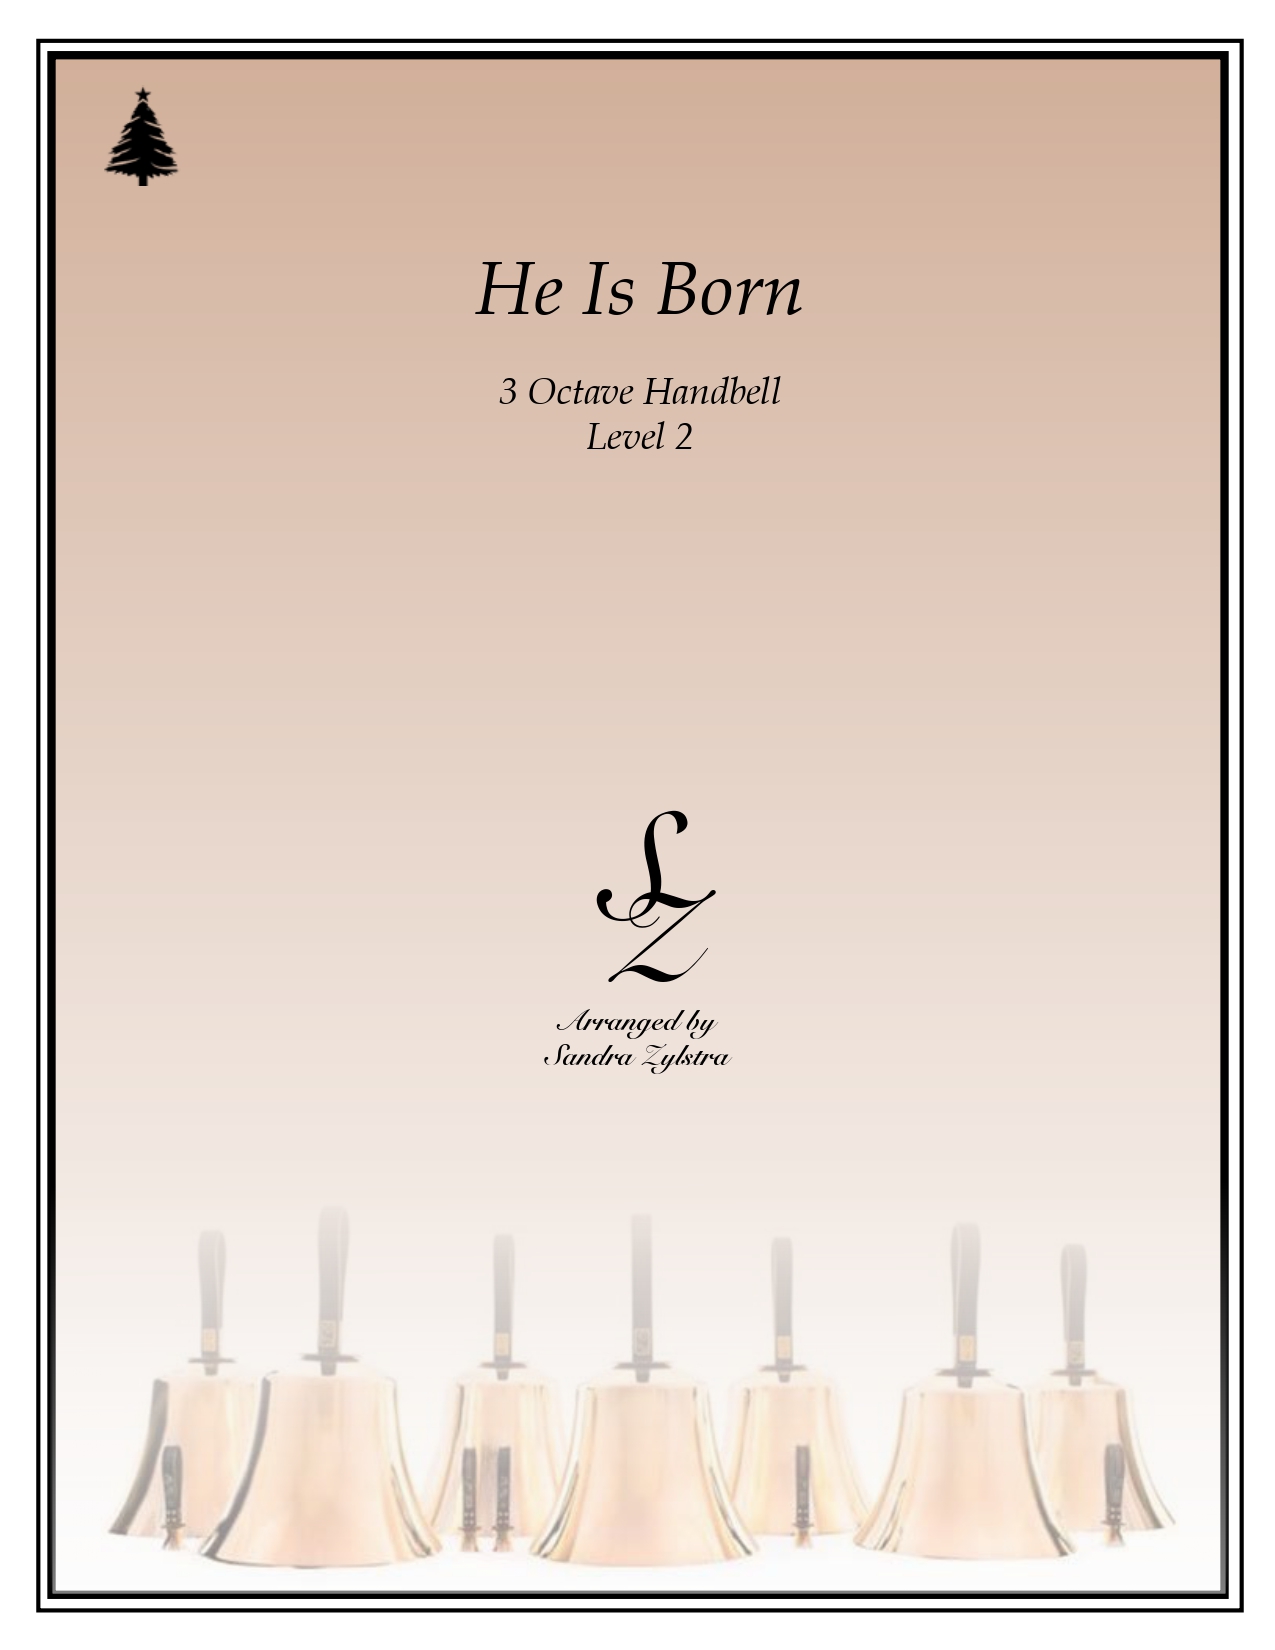 He Is Born 3 octave handbells cover page 00011